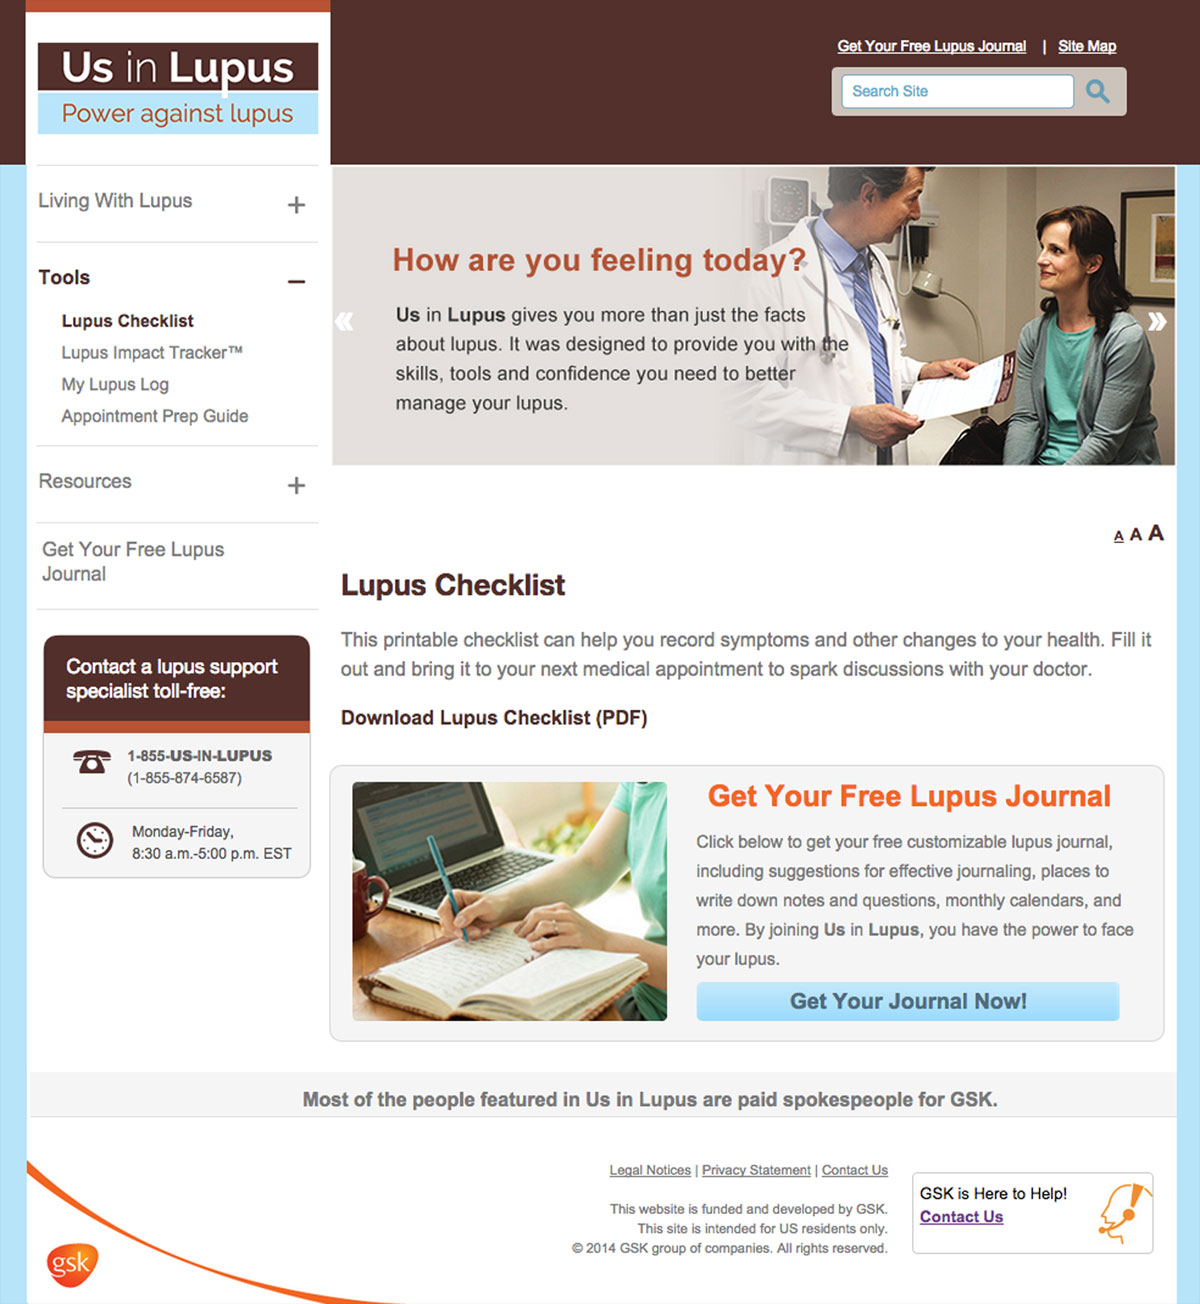 Online resource designed by GSK that offers people living with lupus the skills, tools, and confidence they need to help them face lupus.